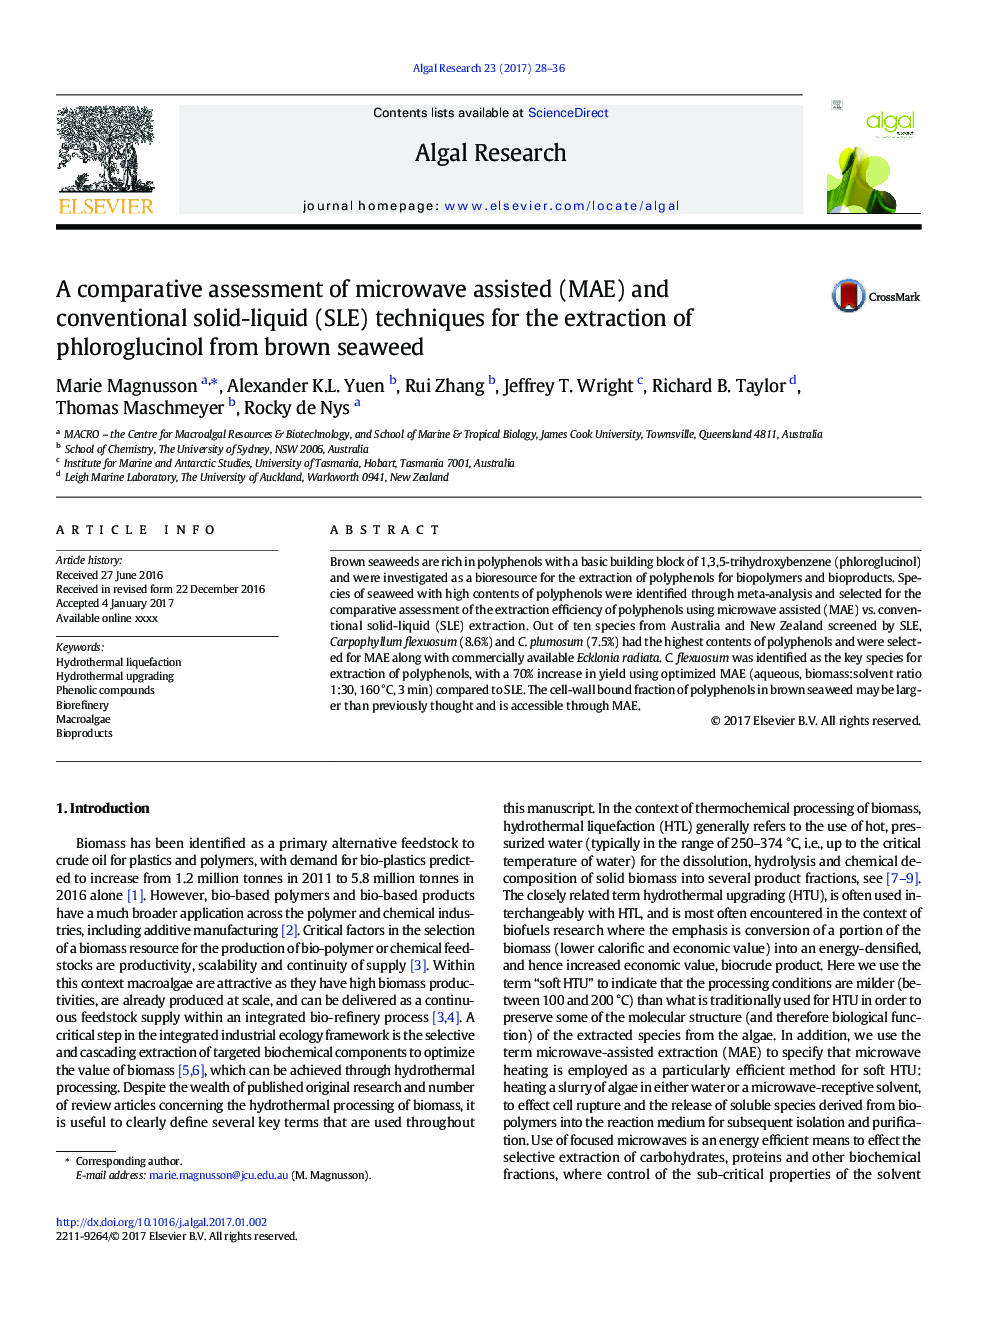 A comparative assessment of microwave assisted (MAE) and conventional solid-liquid (SLE) techniques for the extraction of phloroglucinol from brown seaweed